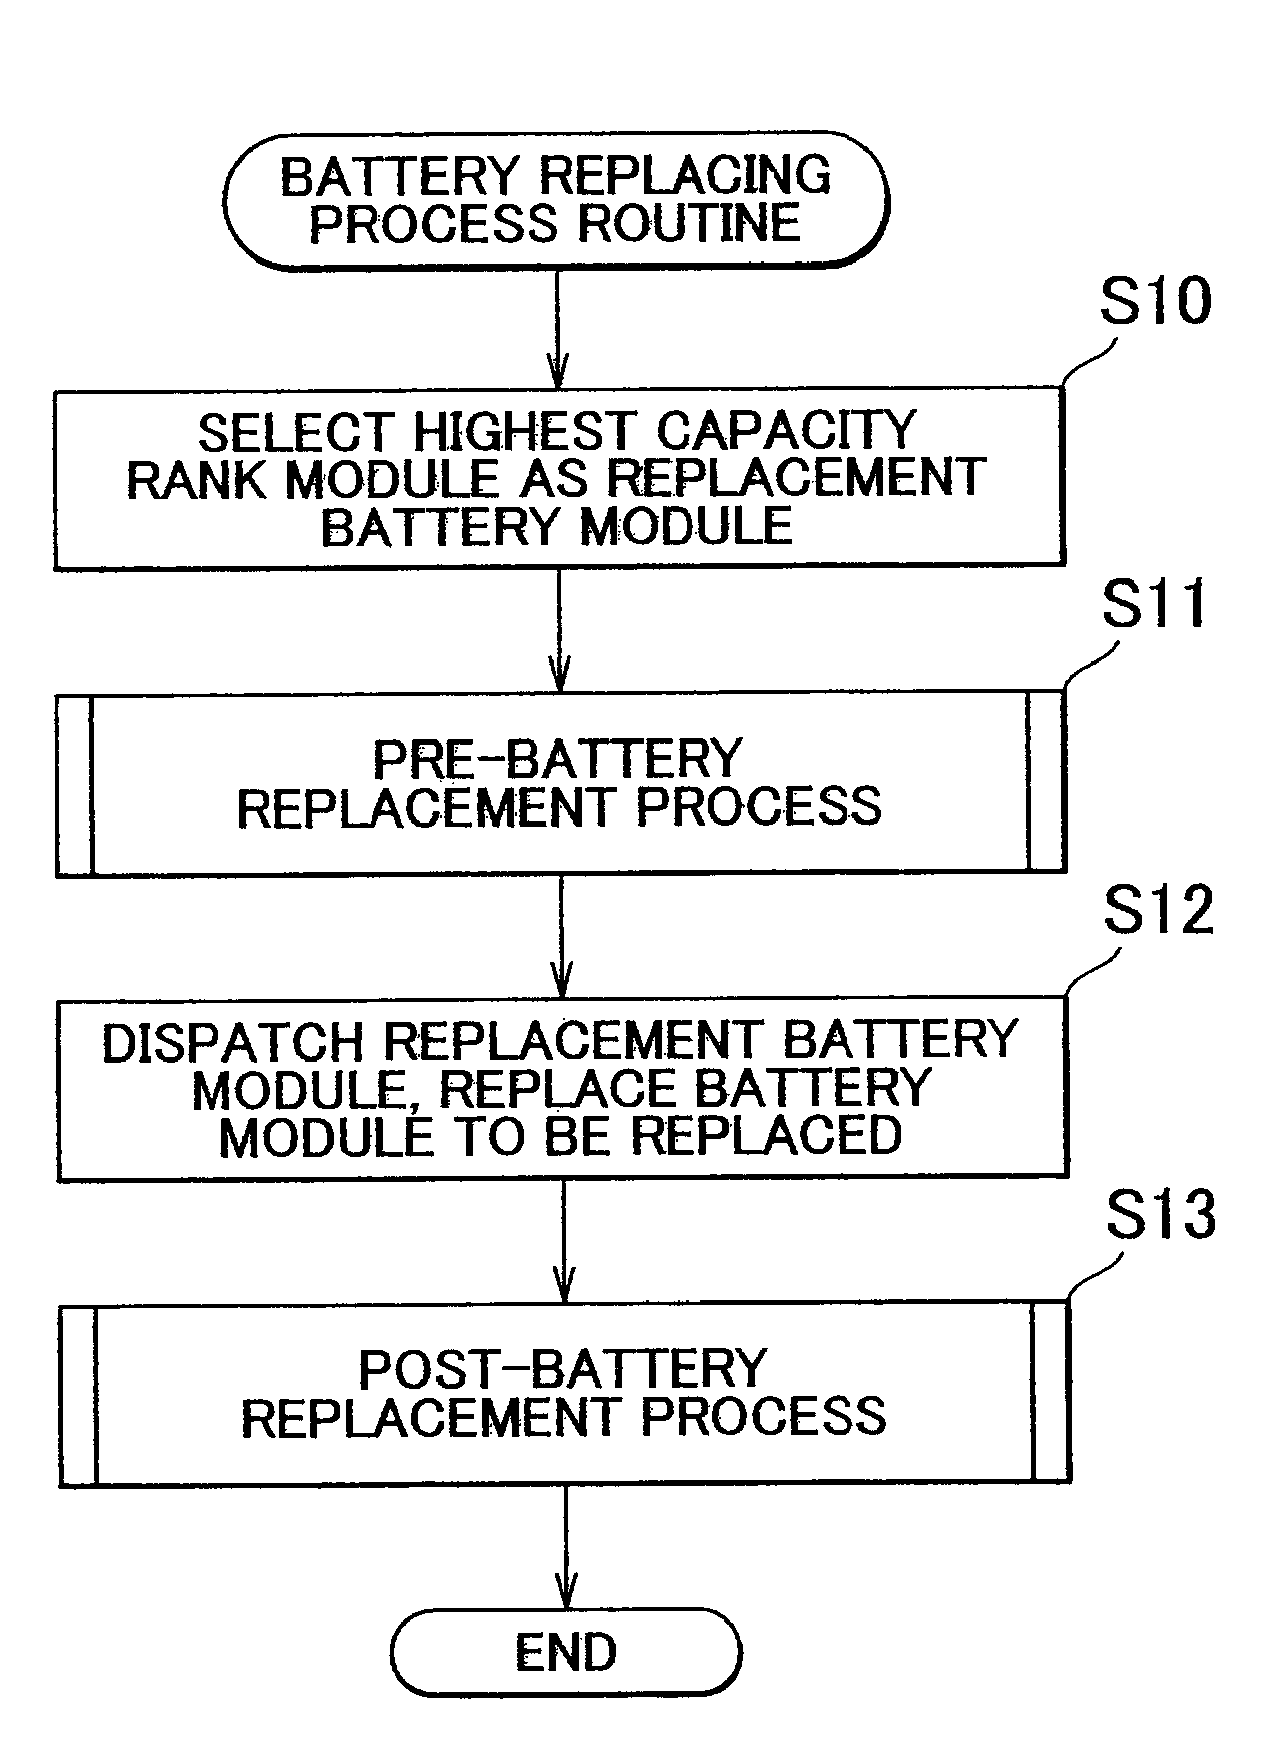 Secondary cell replacing method